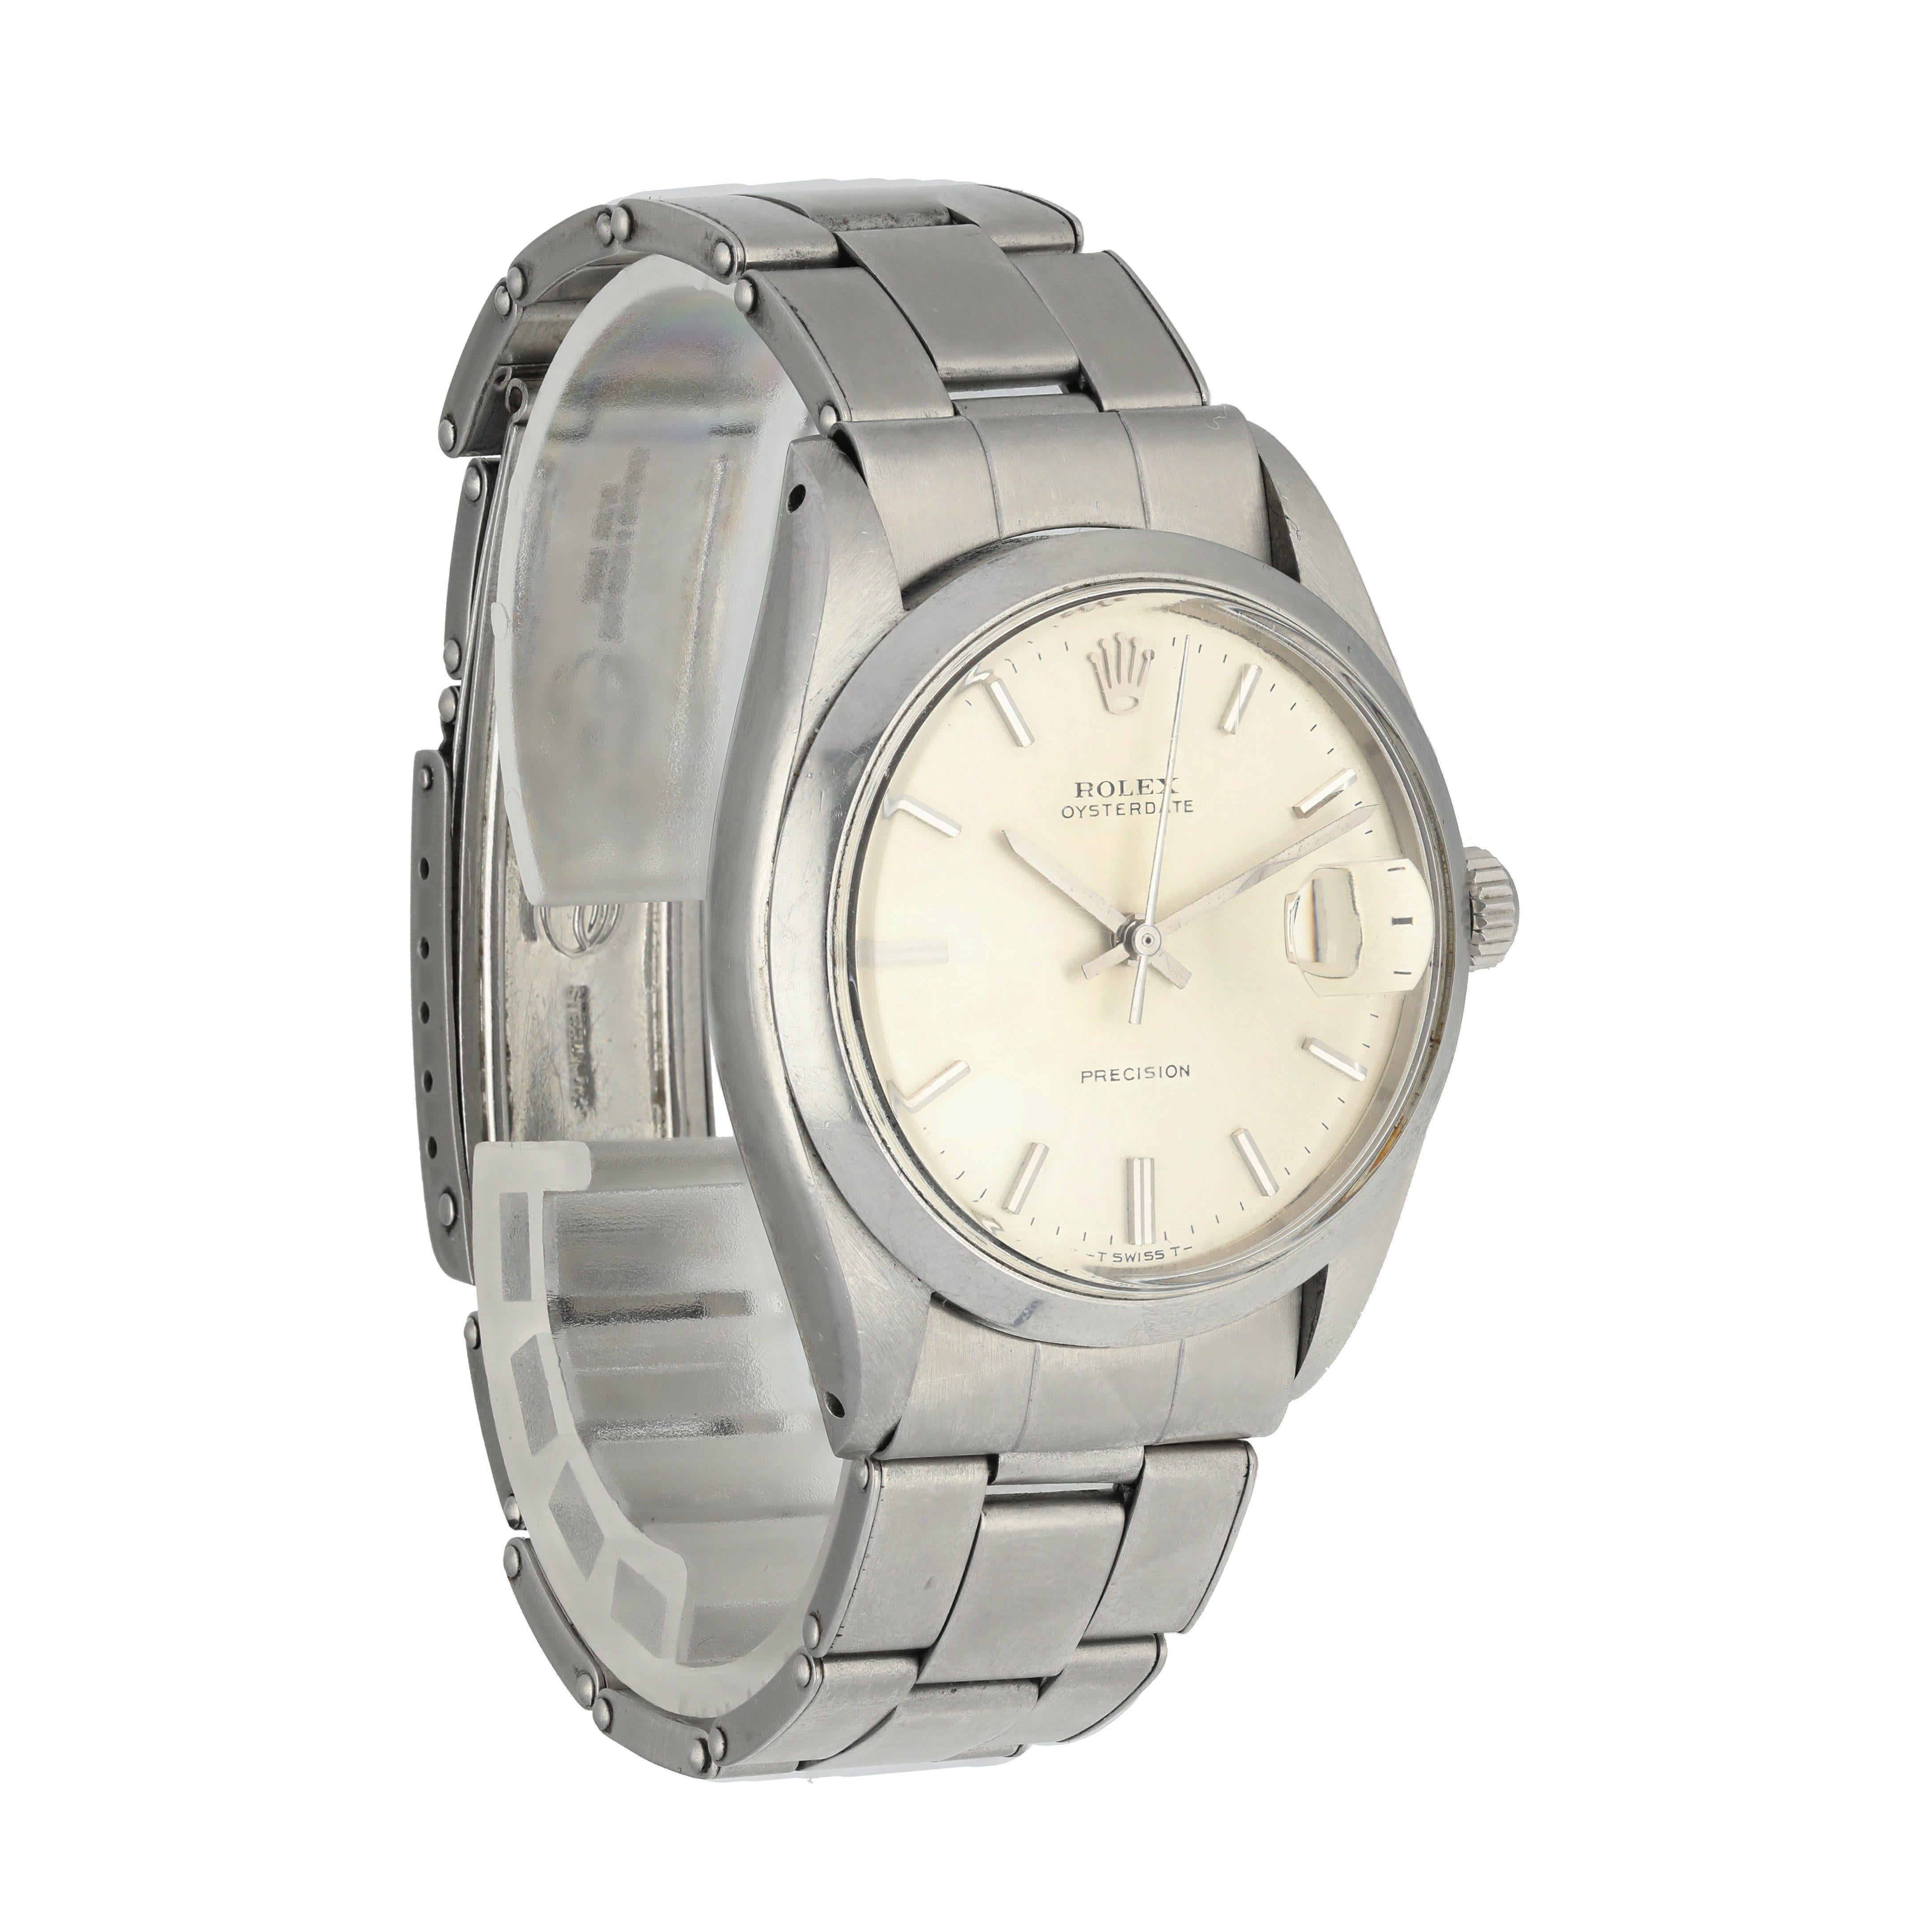 Rolex OysterDate Precision 6694 Men's Watch In Excellent Condition For Sale In New York, NY